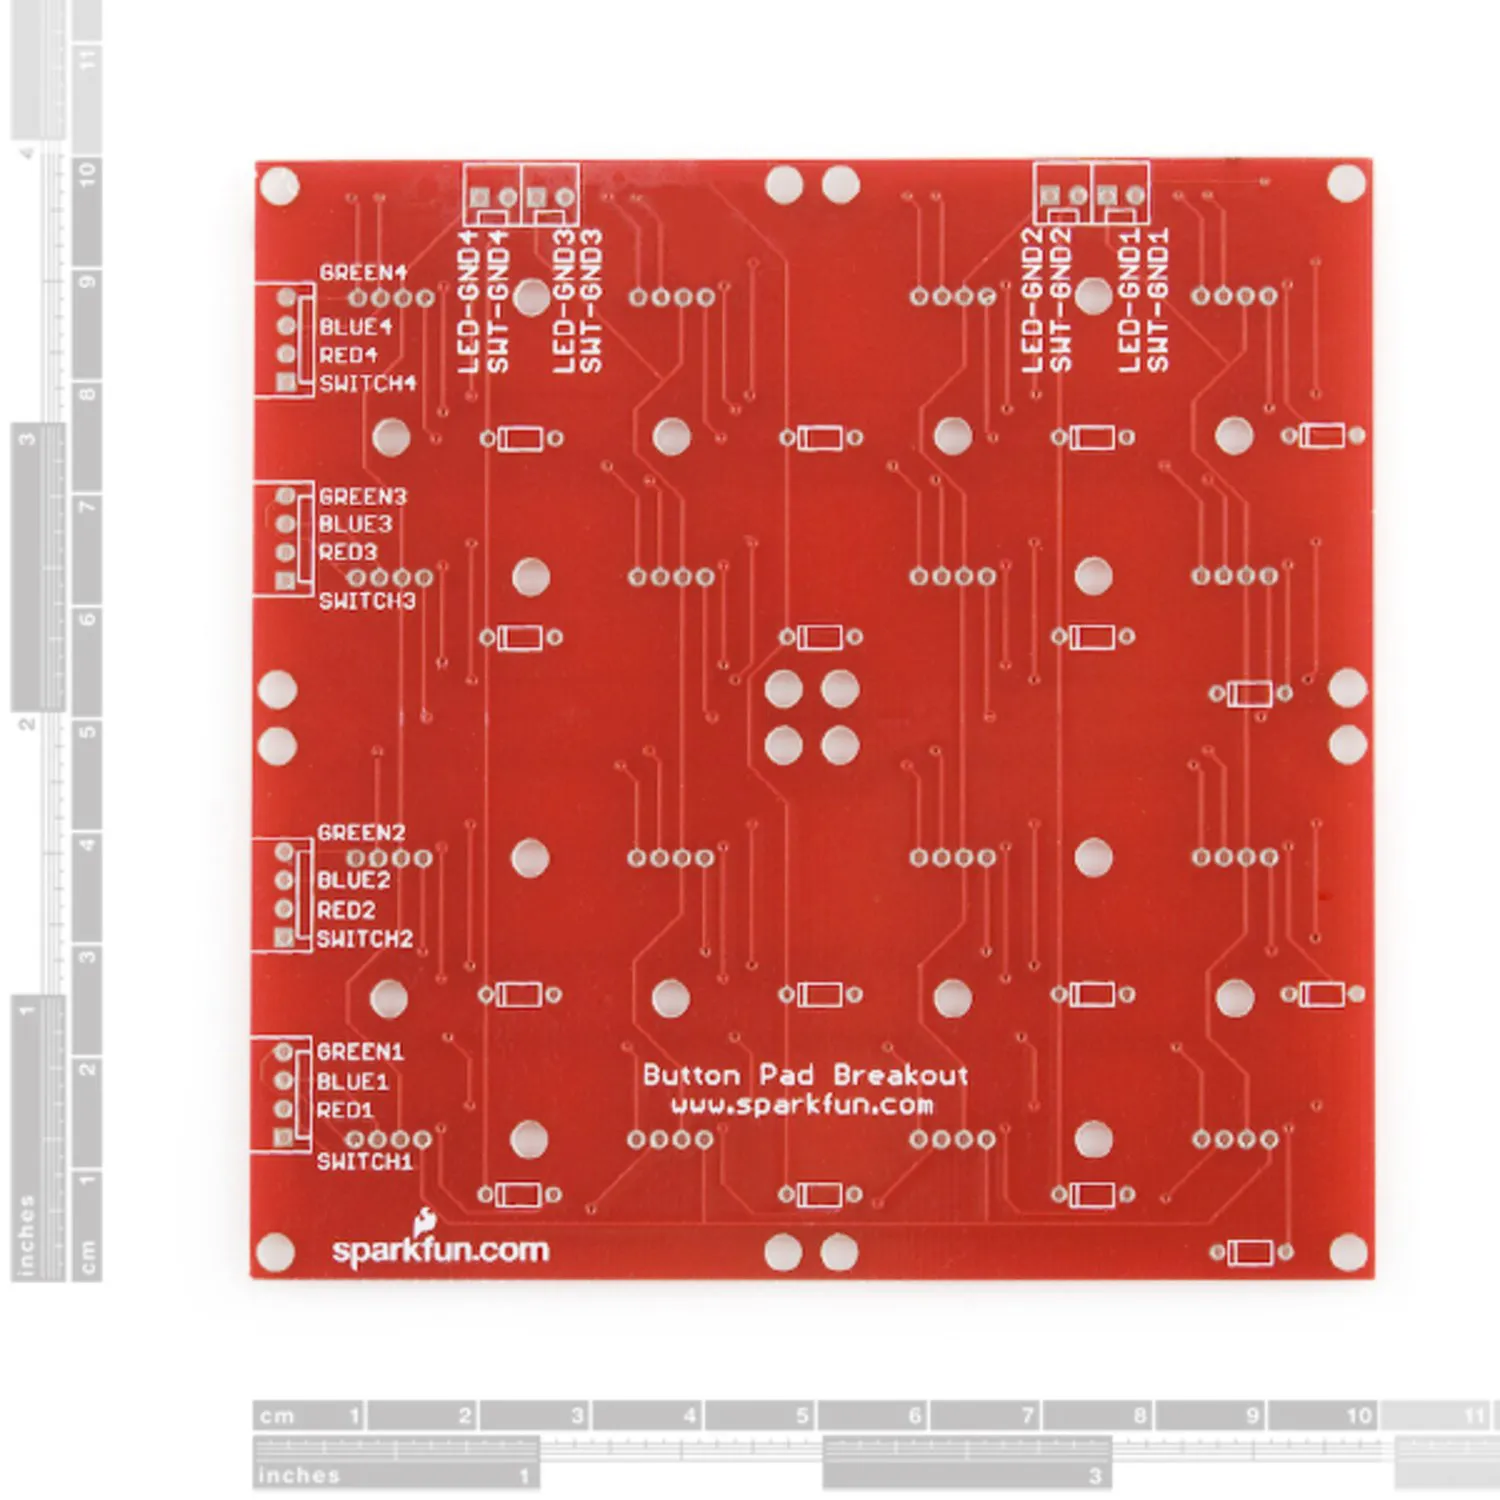 Photo of Button Pad 4x4 - Breakout PCB